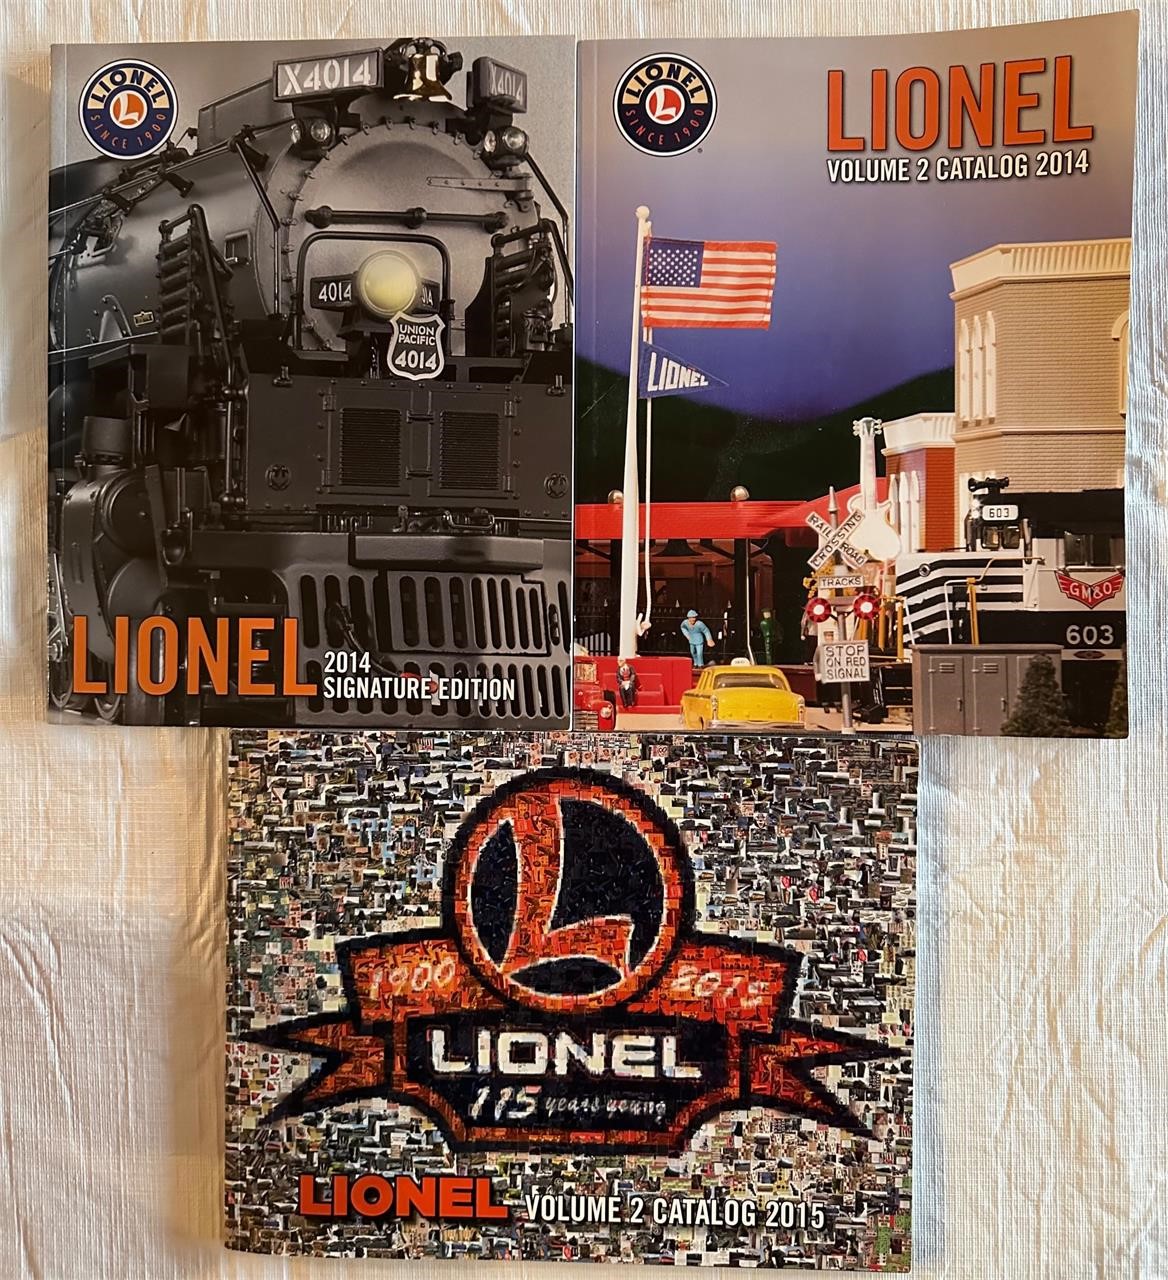 2014 and 2015 Lionel Catalogs